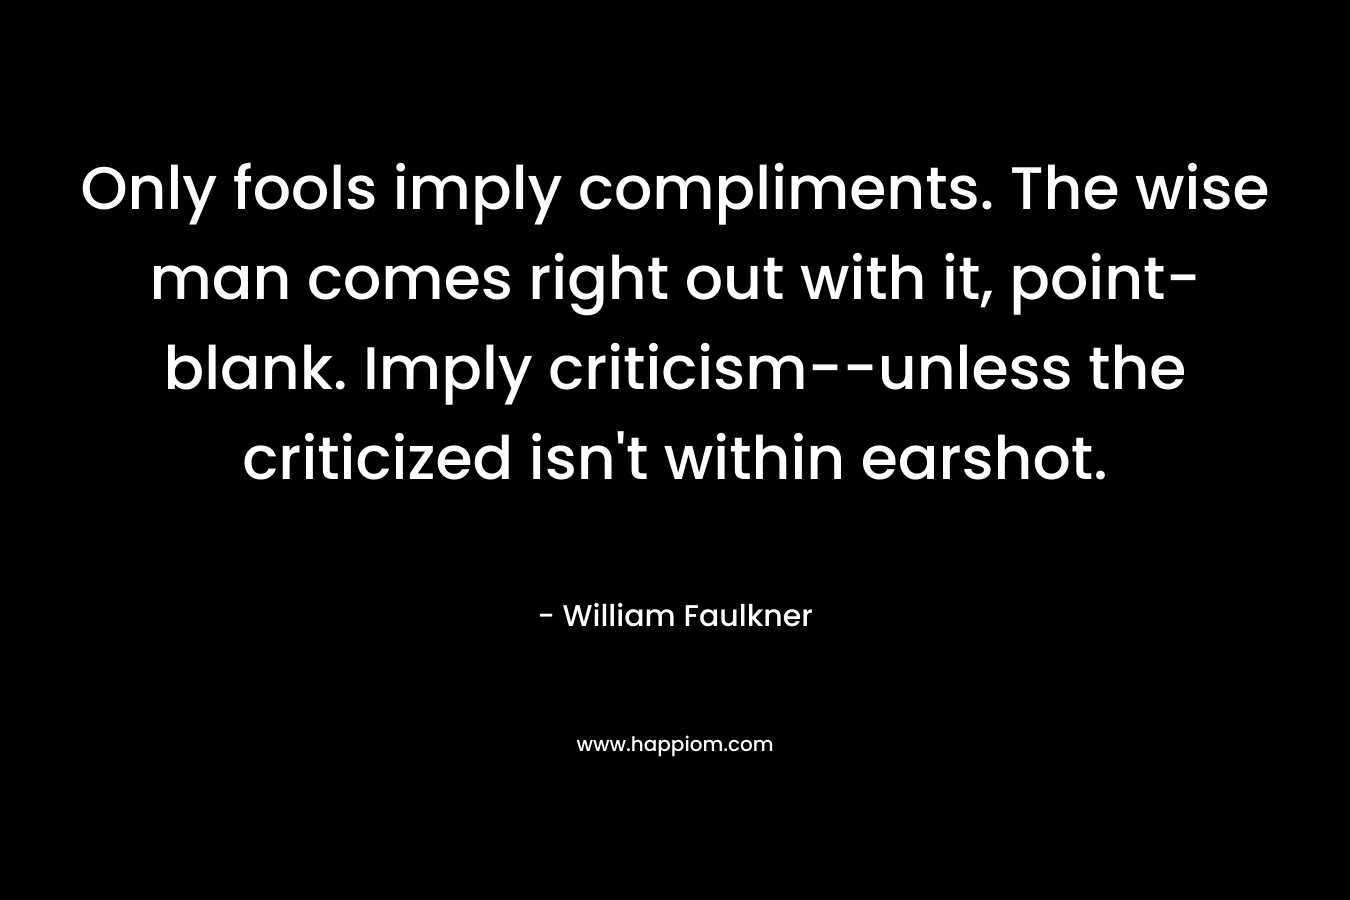 Only fools imply compliments. The wise man comes right out with it, point-blank. Imply criticism–unless the criticized isn’t within earshot. – William Faulkner